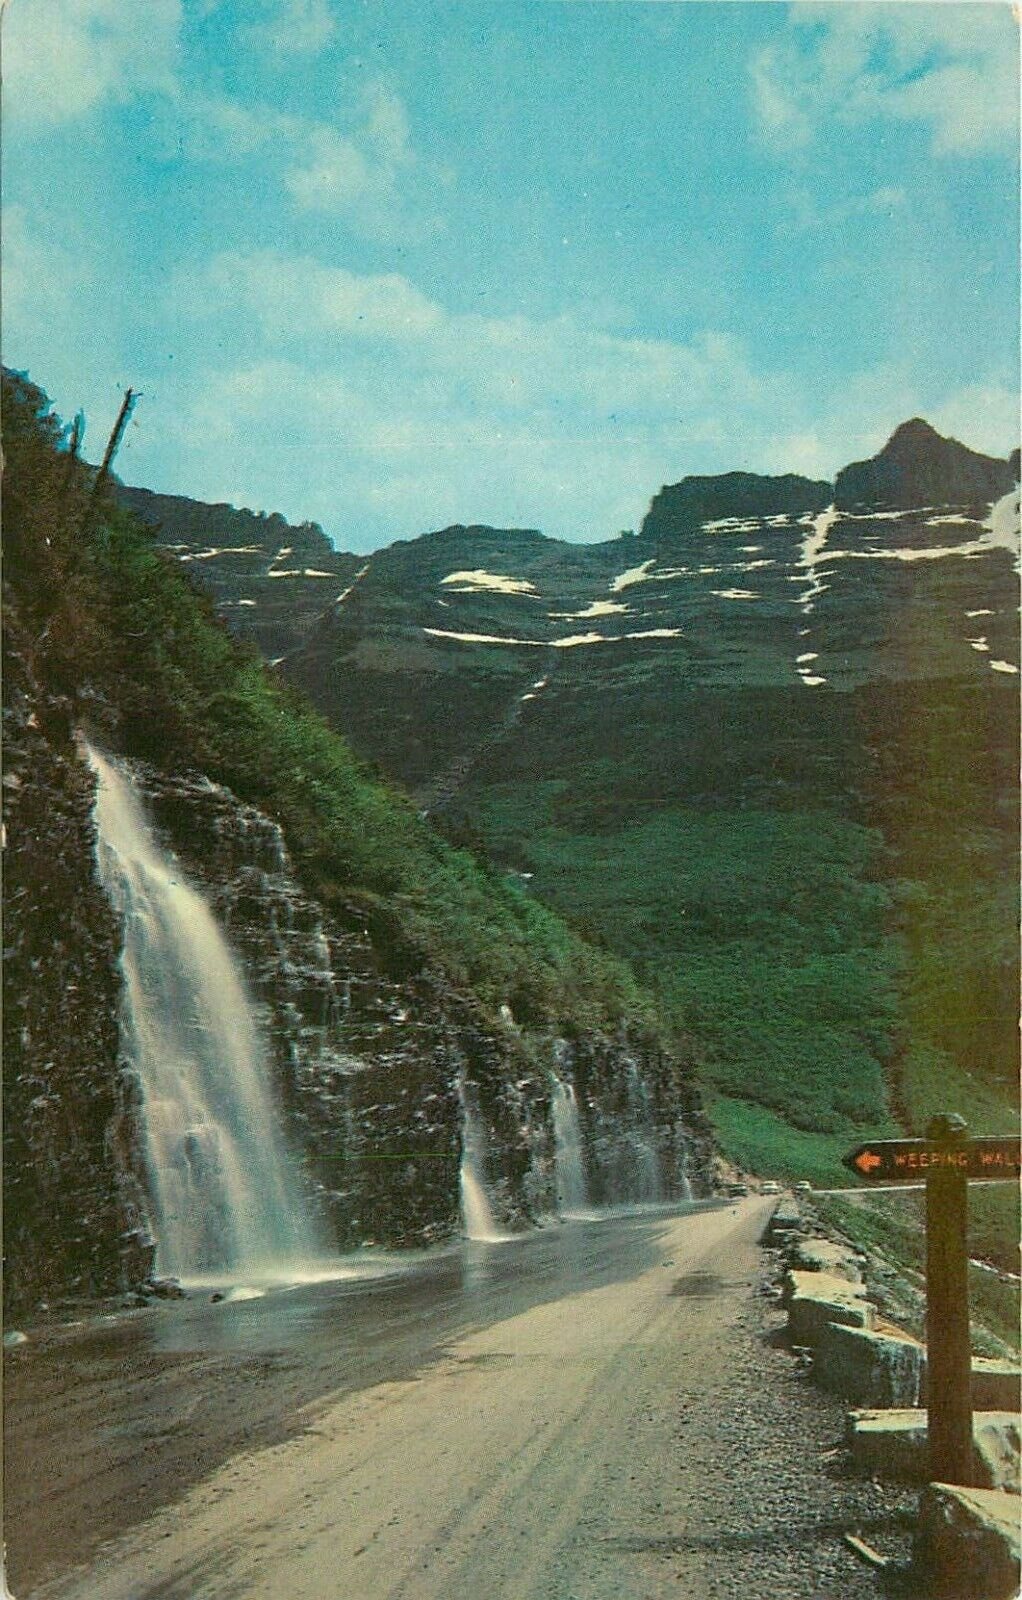 Weeping Wall Glacier National Park Hotel Montana Going to the Sun Hwy Postcard